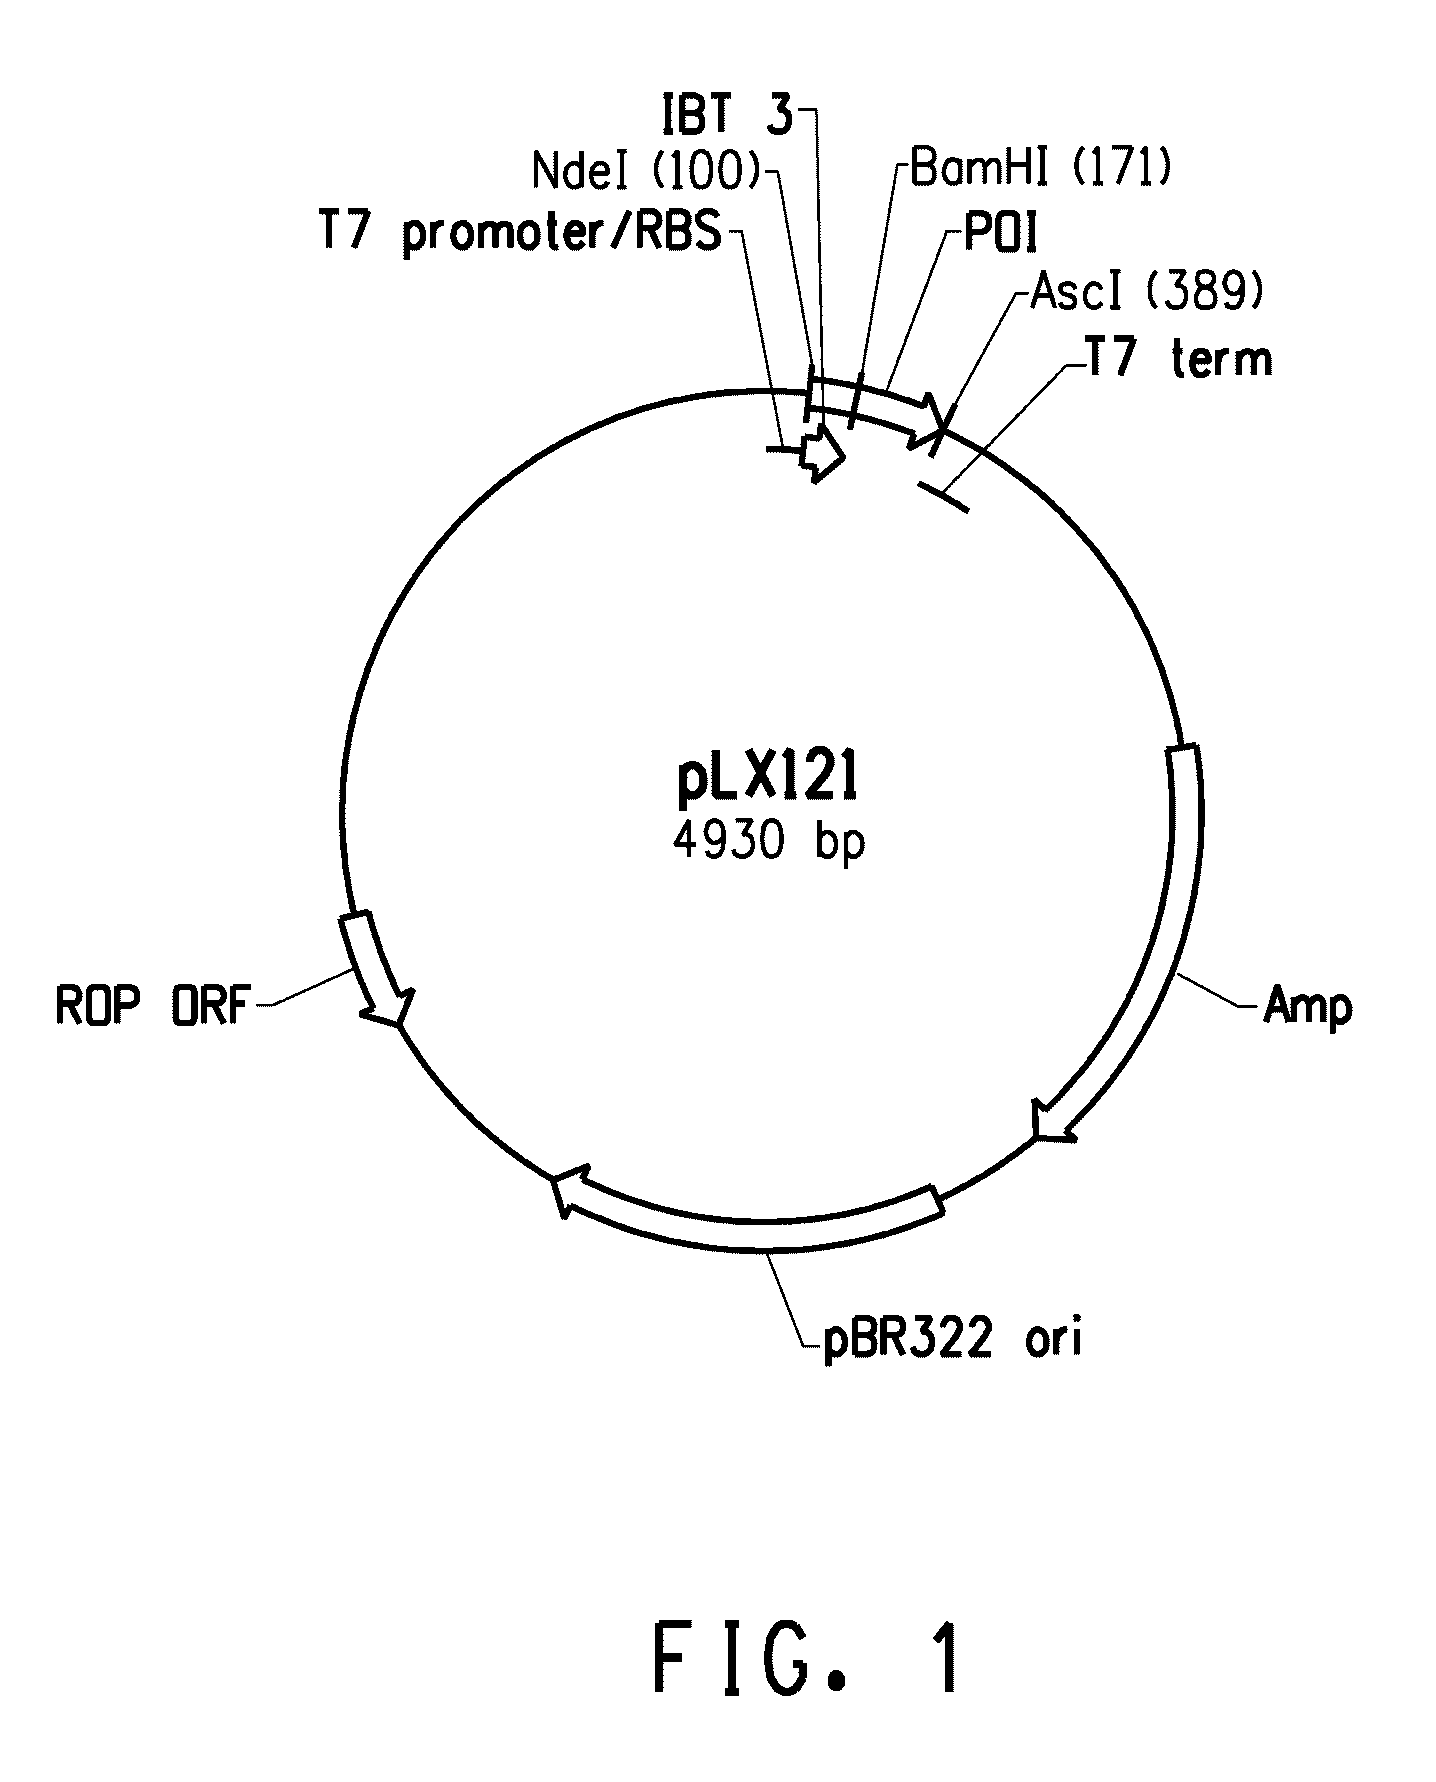 Recombinant peptide production using a cross-linkable solubility tag